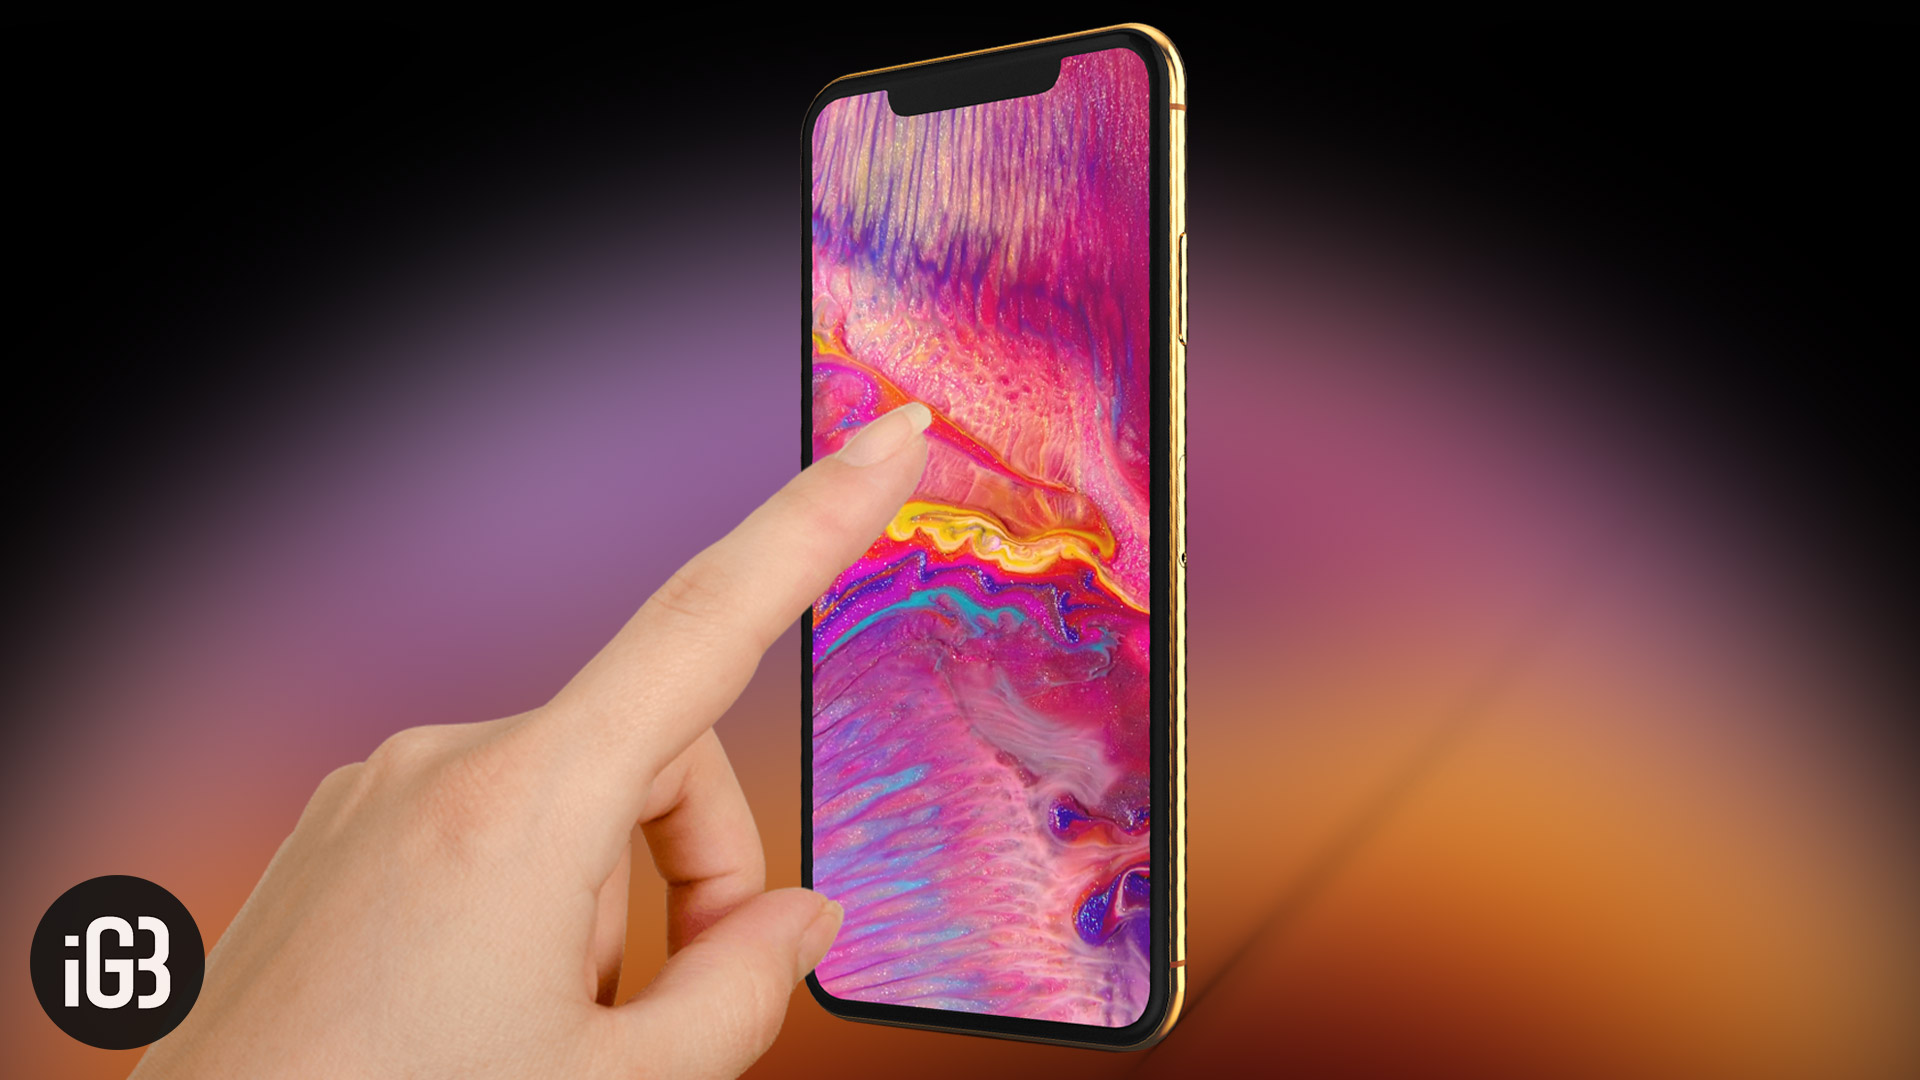 Best Live Wallpaper Apps for iPhone Xs and Xs Max The